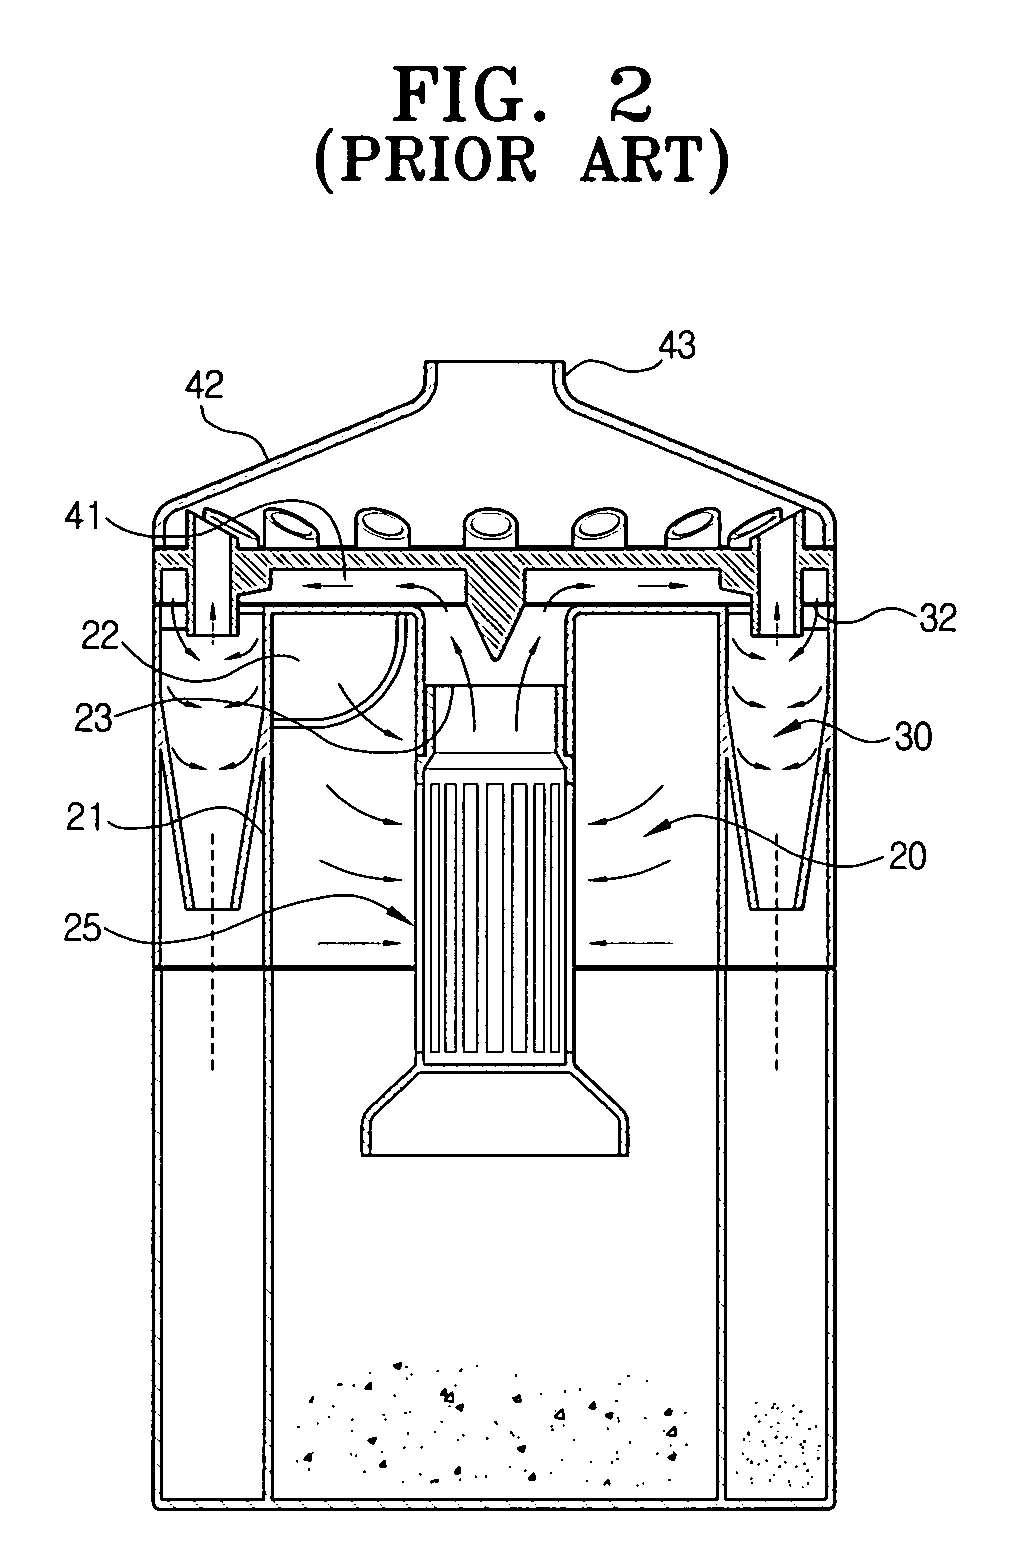 Multi cyclone dust-collecting apparatus